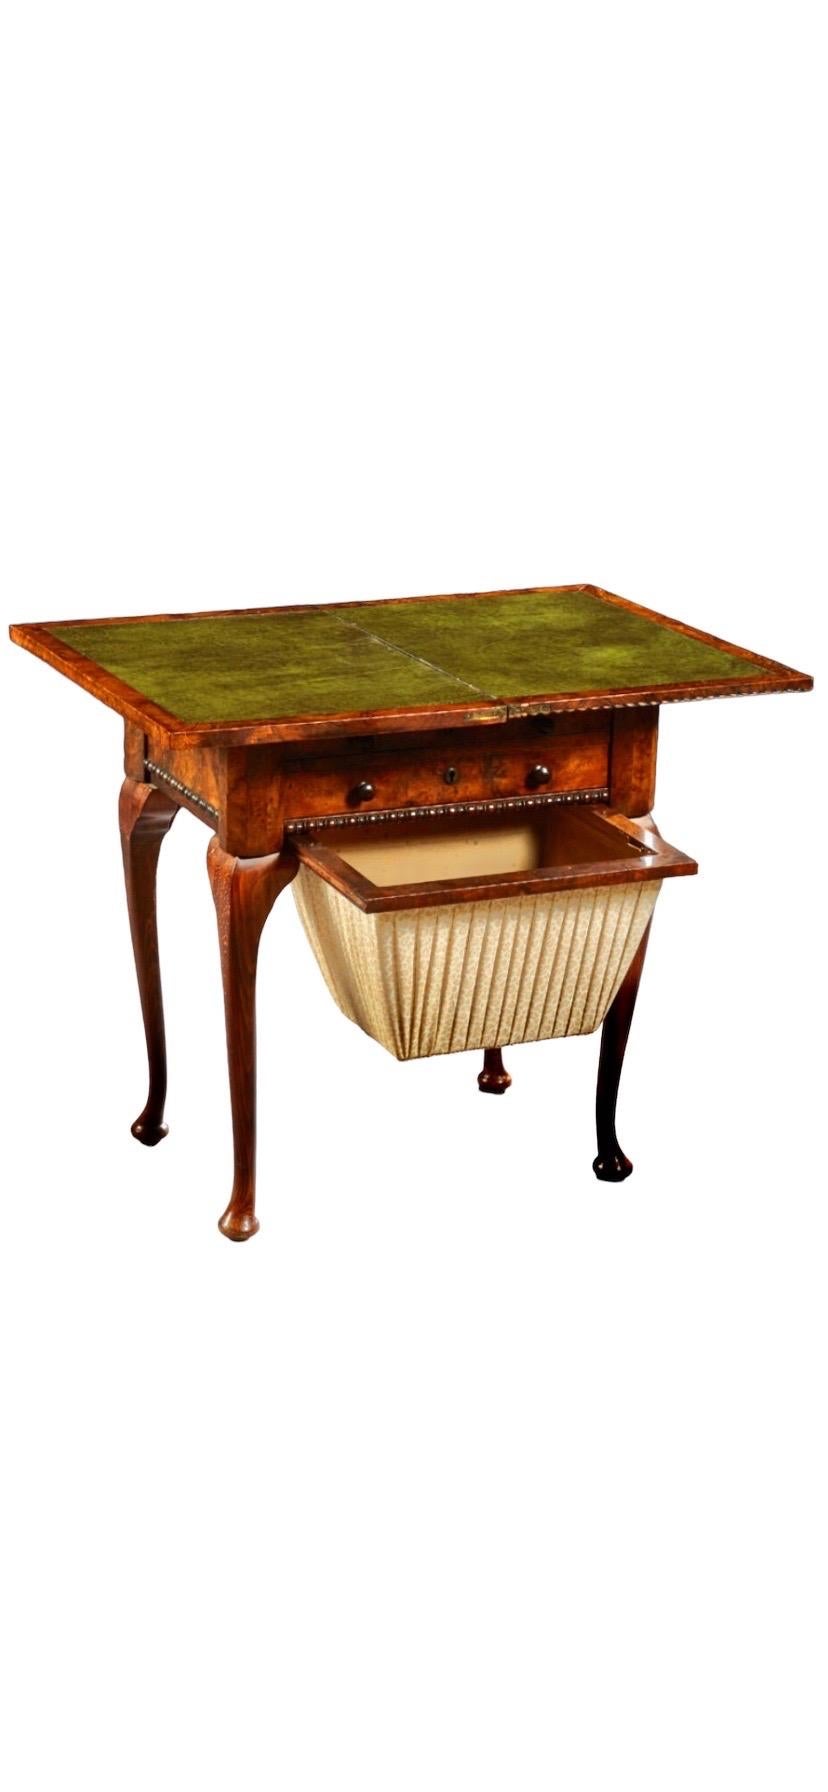 English Queen Anne Carved
Walnut Work/Games Table, 19th c.,
the gadrooned edge top opening to
a leather inset gaming surface over a pull
out backgammon board above a
compartmented sewing drawer above a inlaid chess/checkers board and
a bottom work